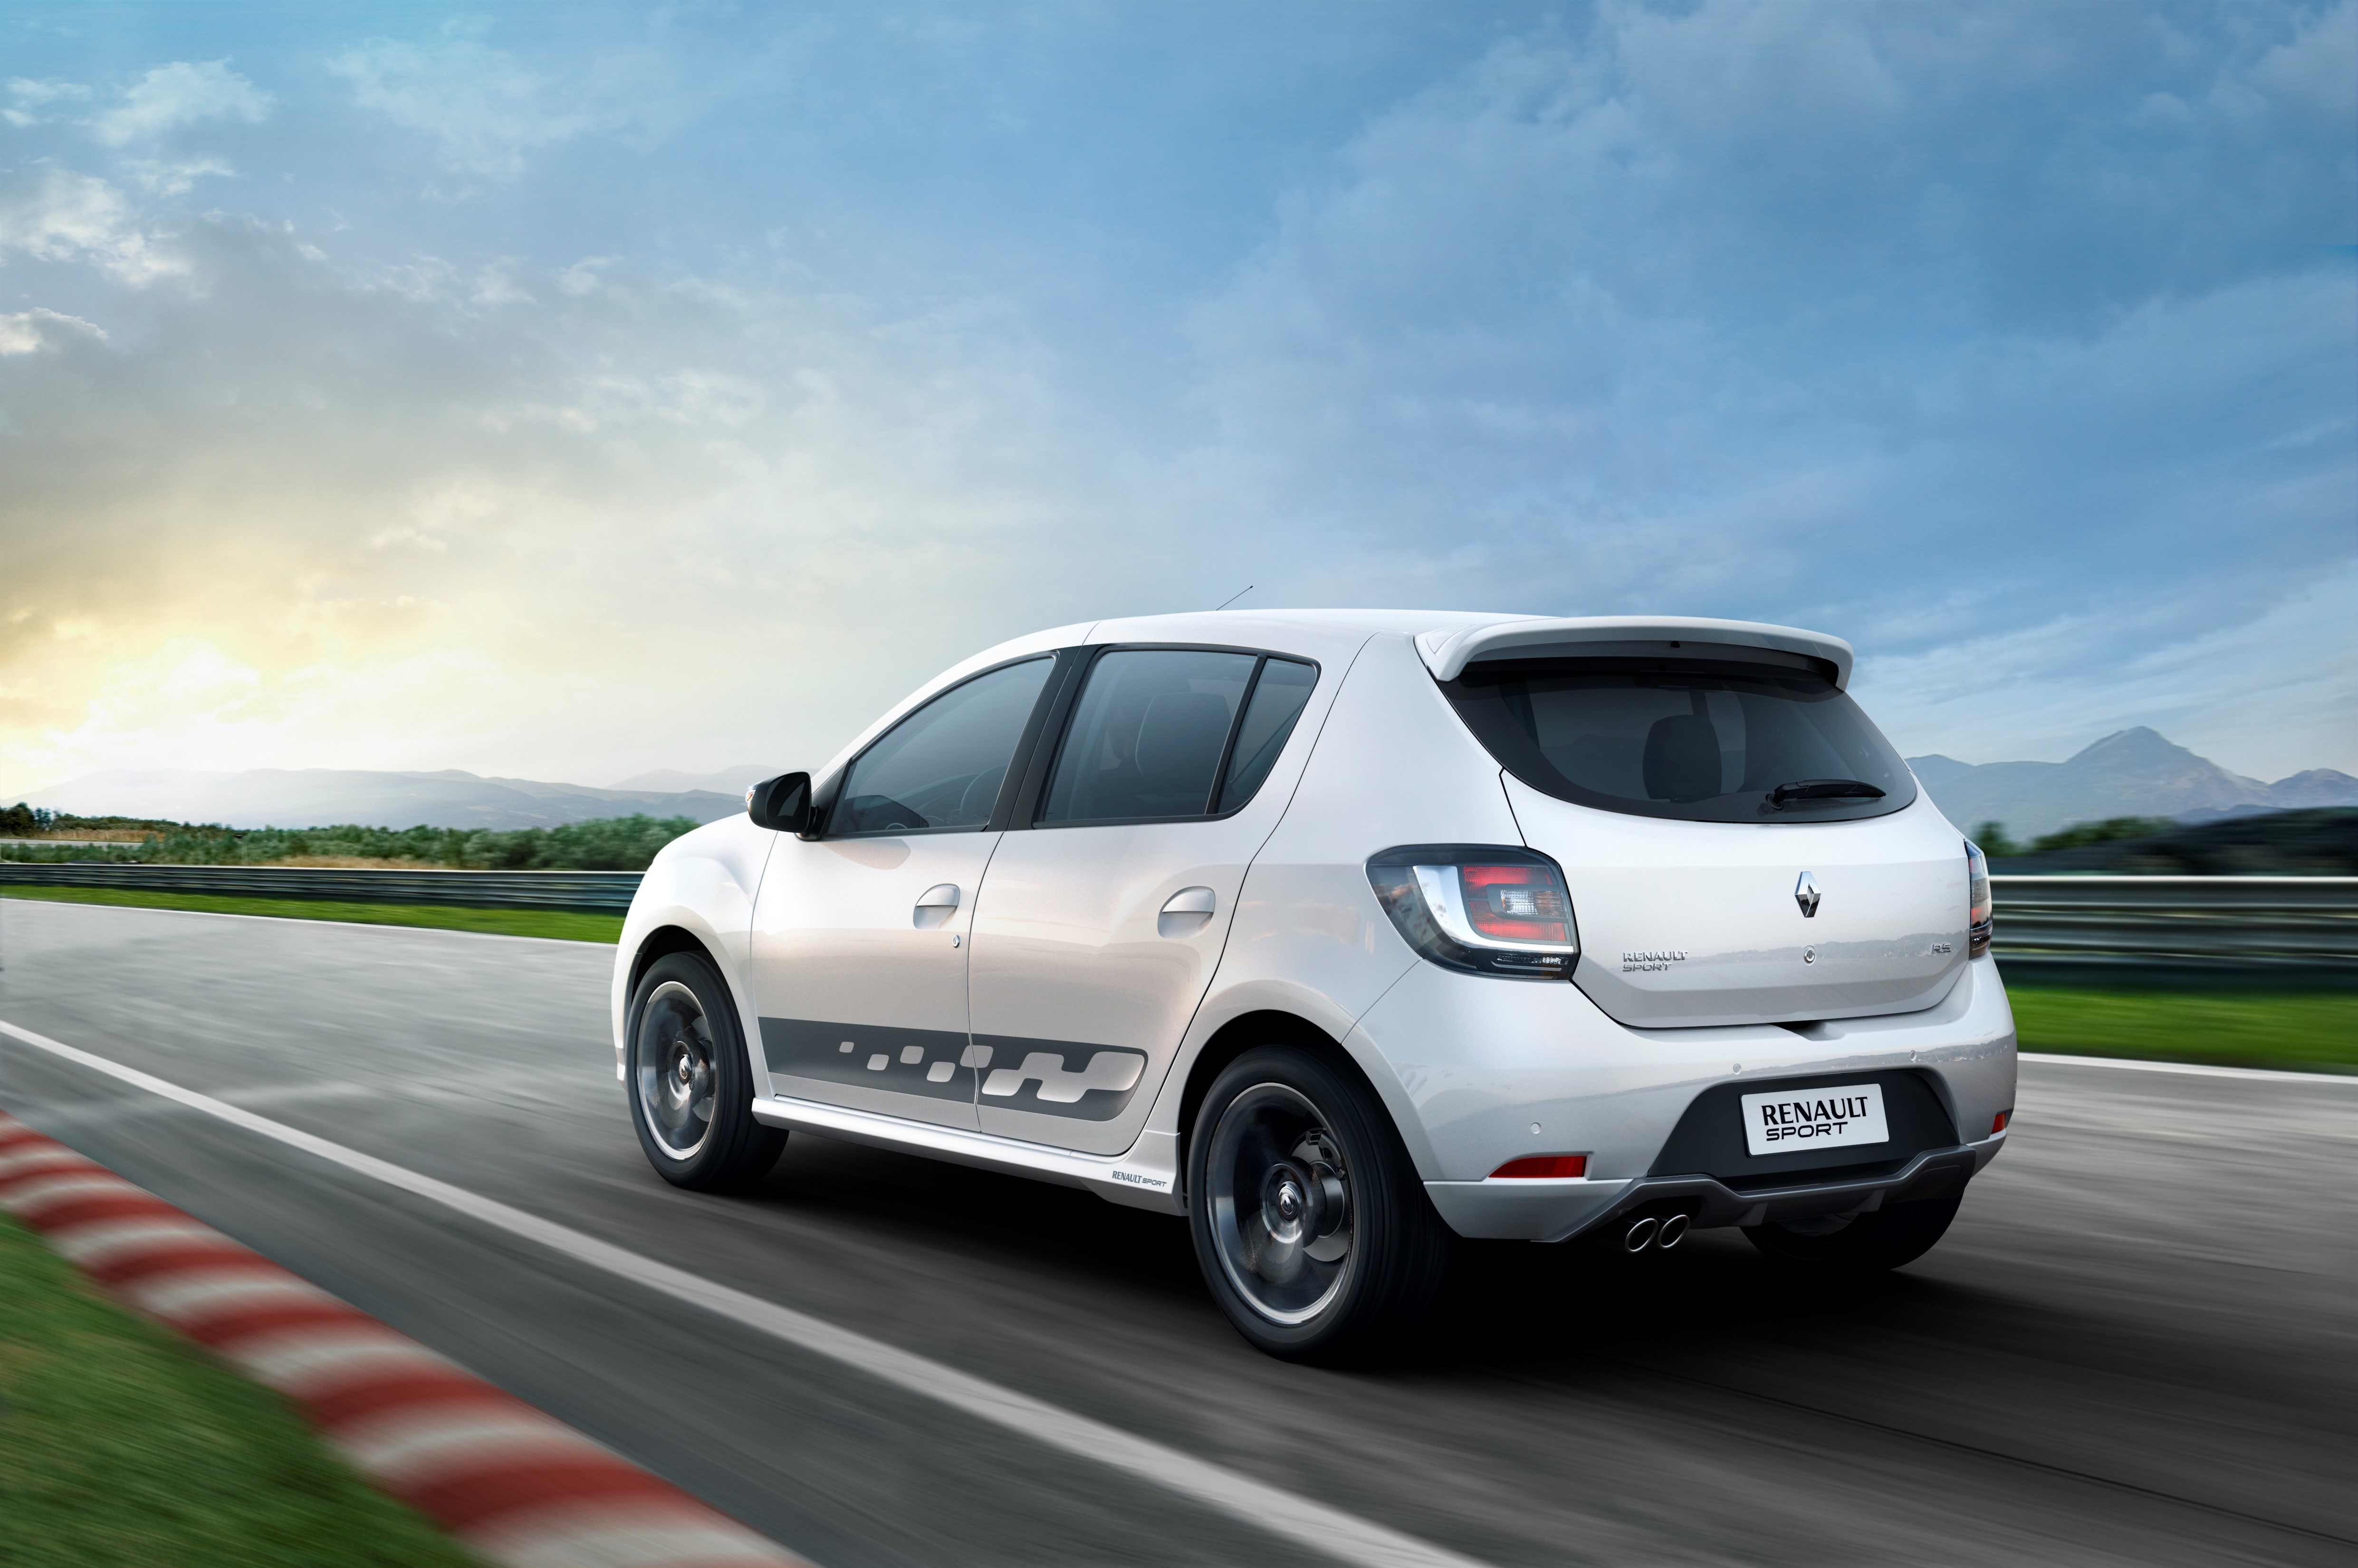 Renault Sandero RS 2.0 Pricing Announced, 200 KM/H Hot